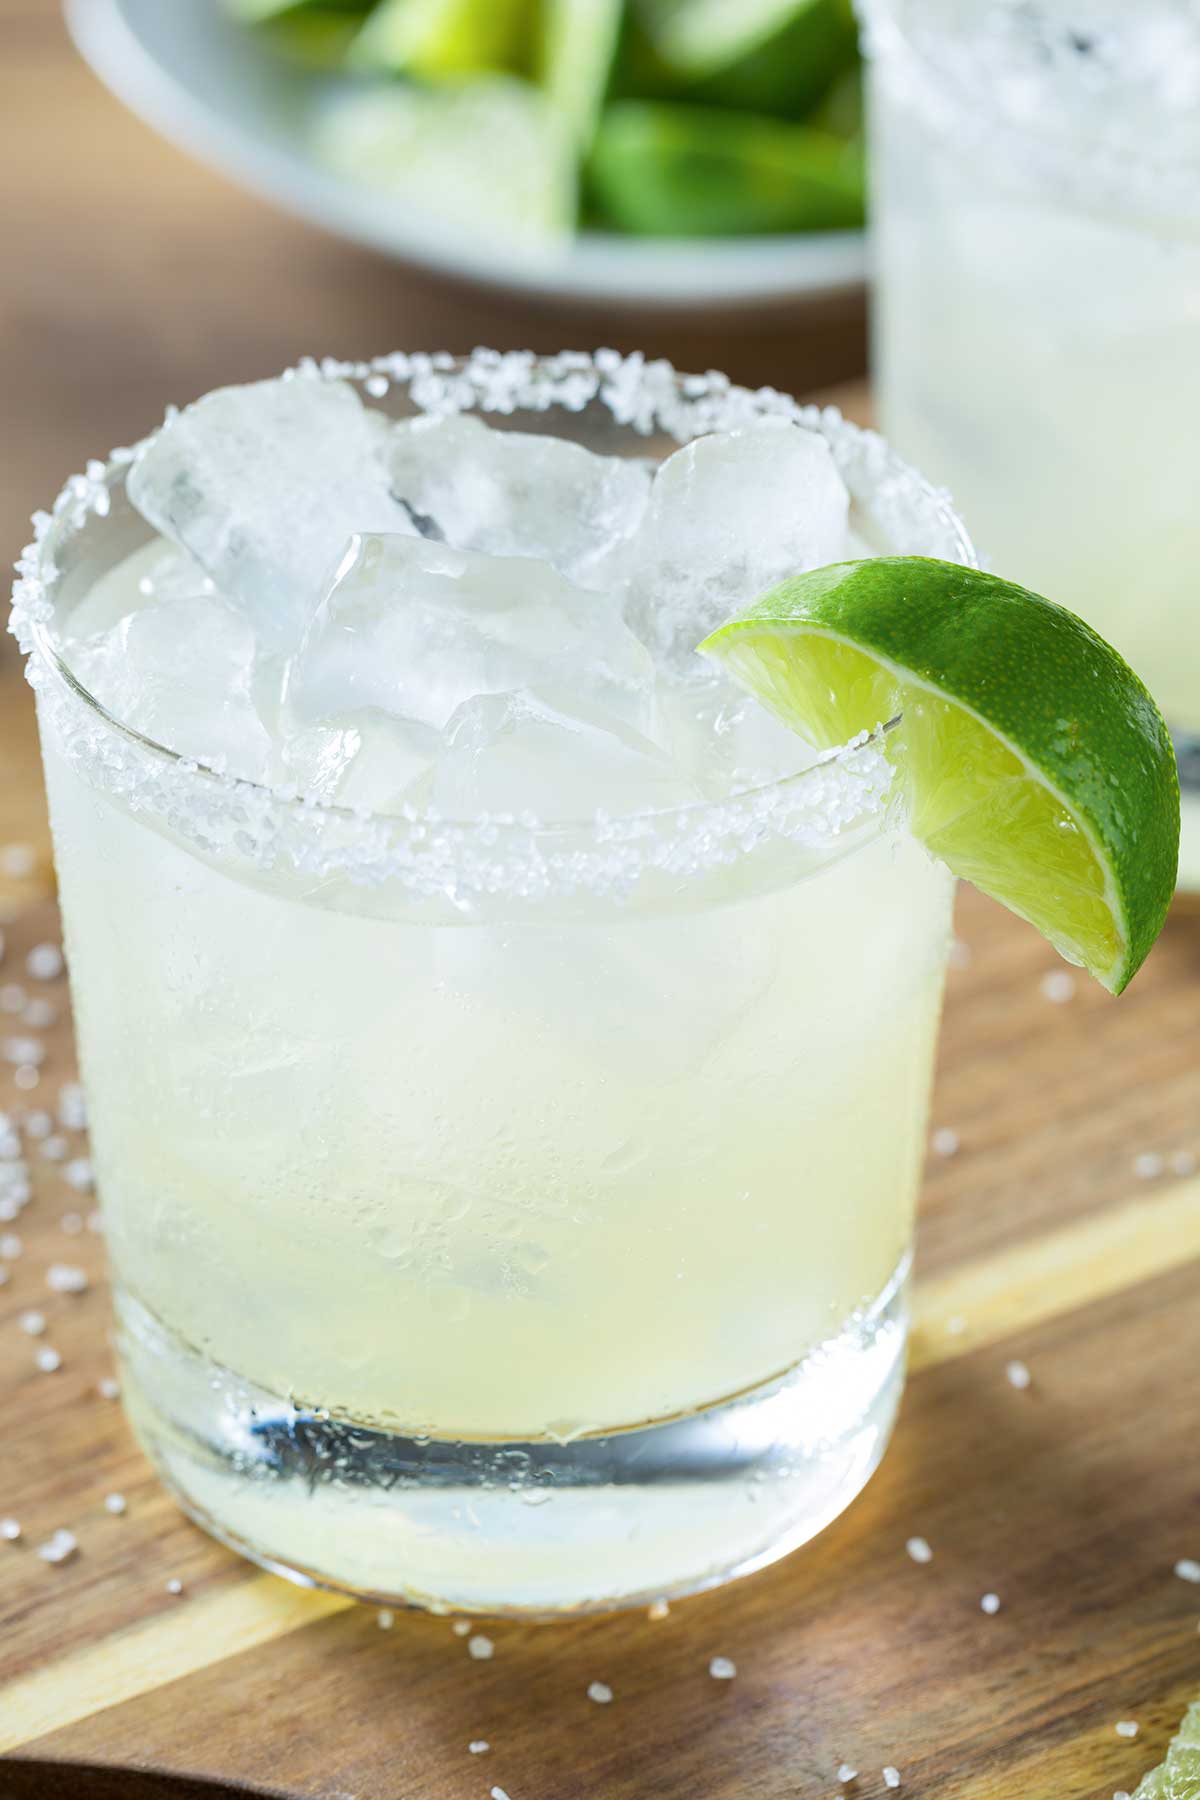 Classic Margarita Is a Simple and Delicious Cocktail.